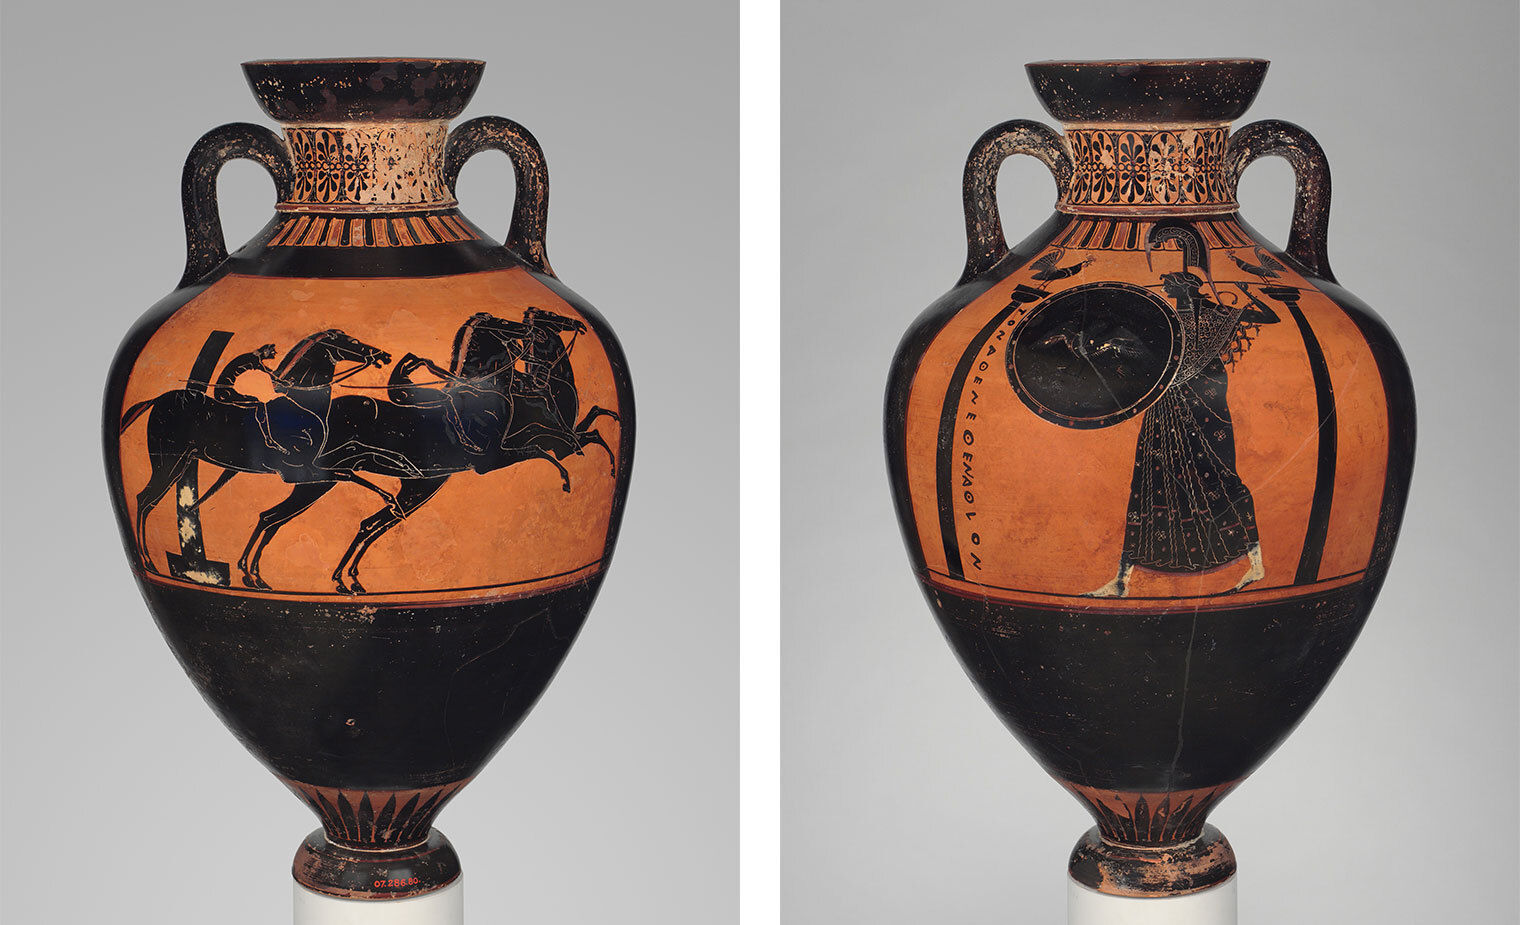 A terracotta vase depicting a chariot race on one side and the goddess Athena on the other